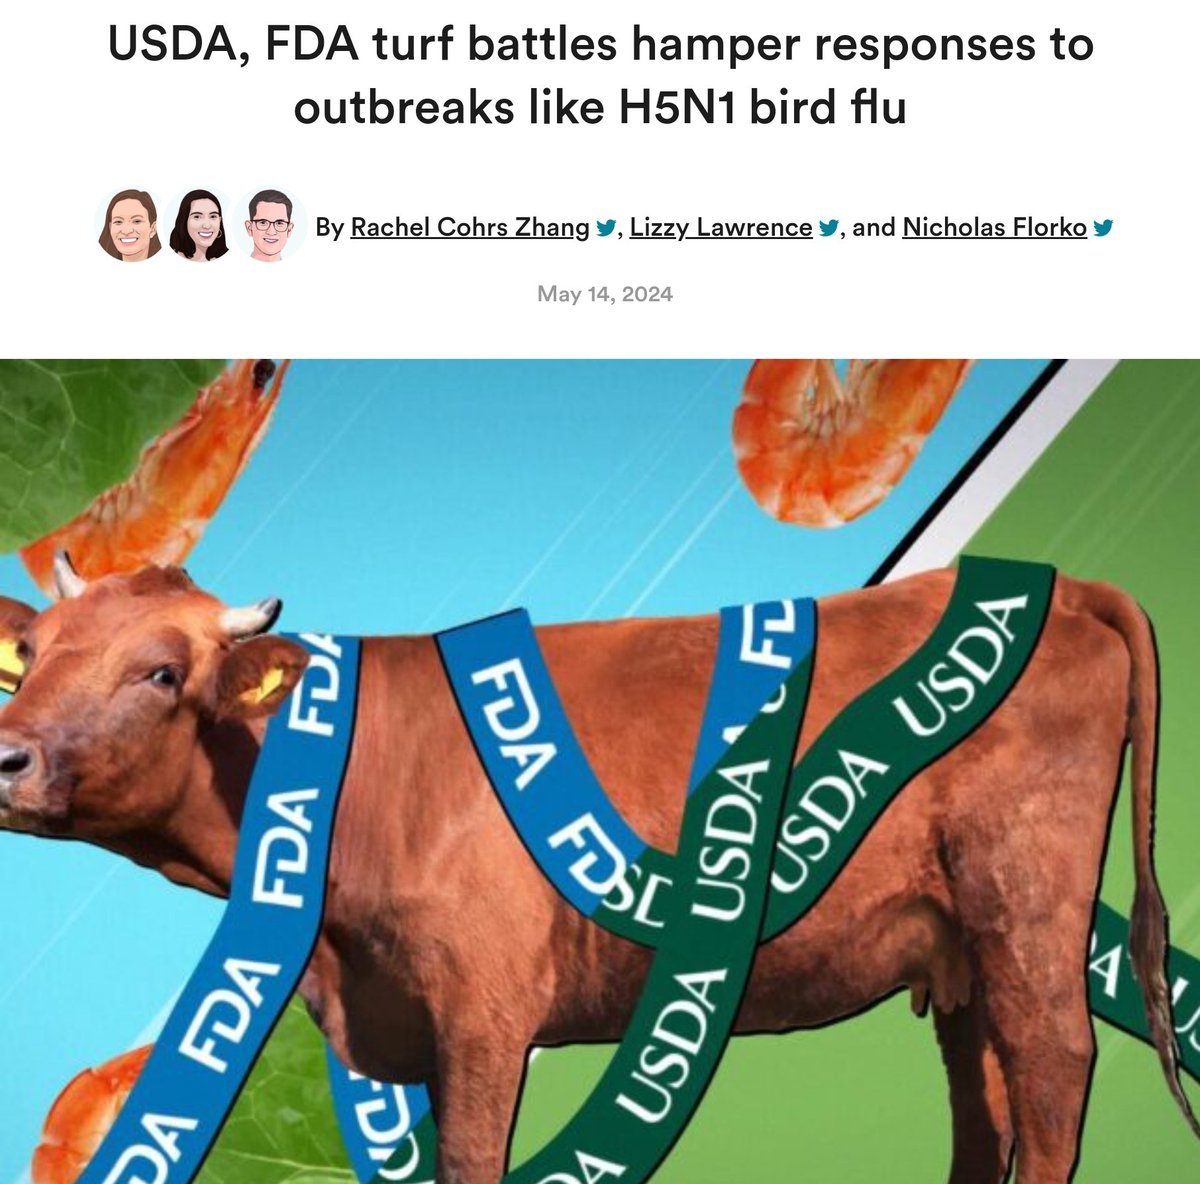 Excellent piece that doesn't exactly inspire confidence in our ability to address H5N1. USDA regulates meat/poultry/eggs & promotes US agriculture. FDA focuses on food & drug safety under HHS. *No federal agency has the authority to test for human diseases on farms and feedlots.*